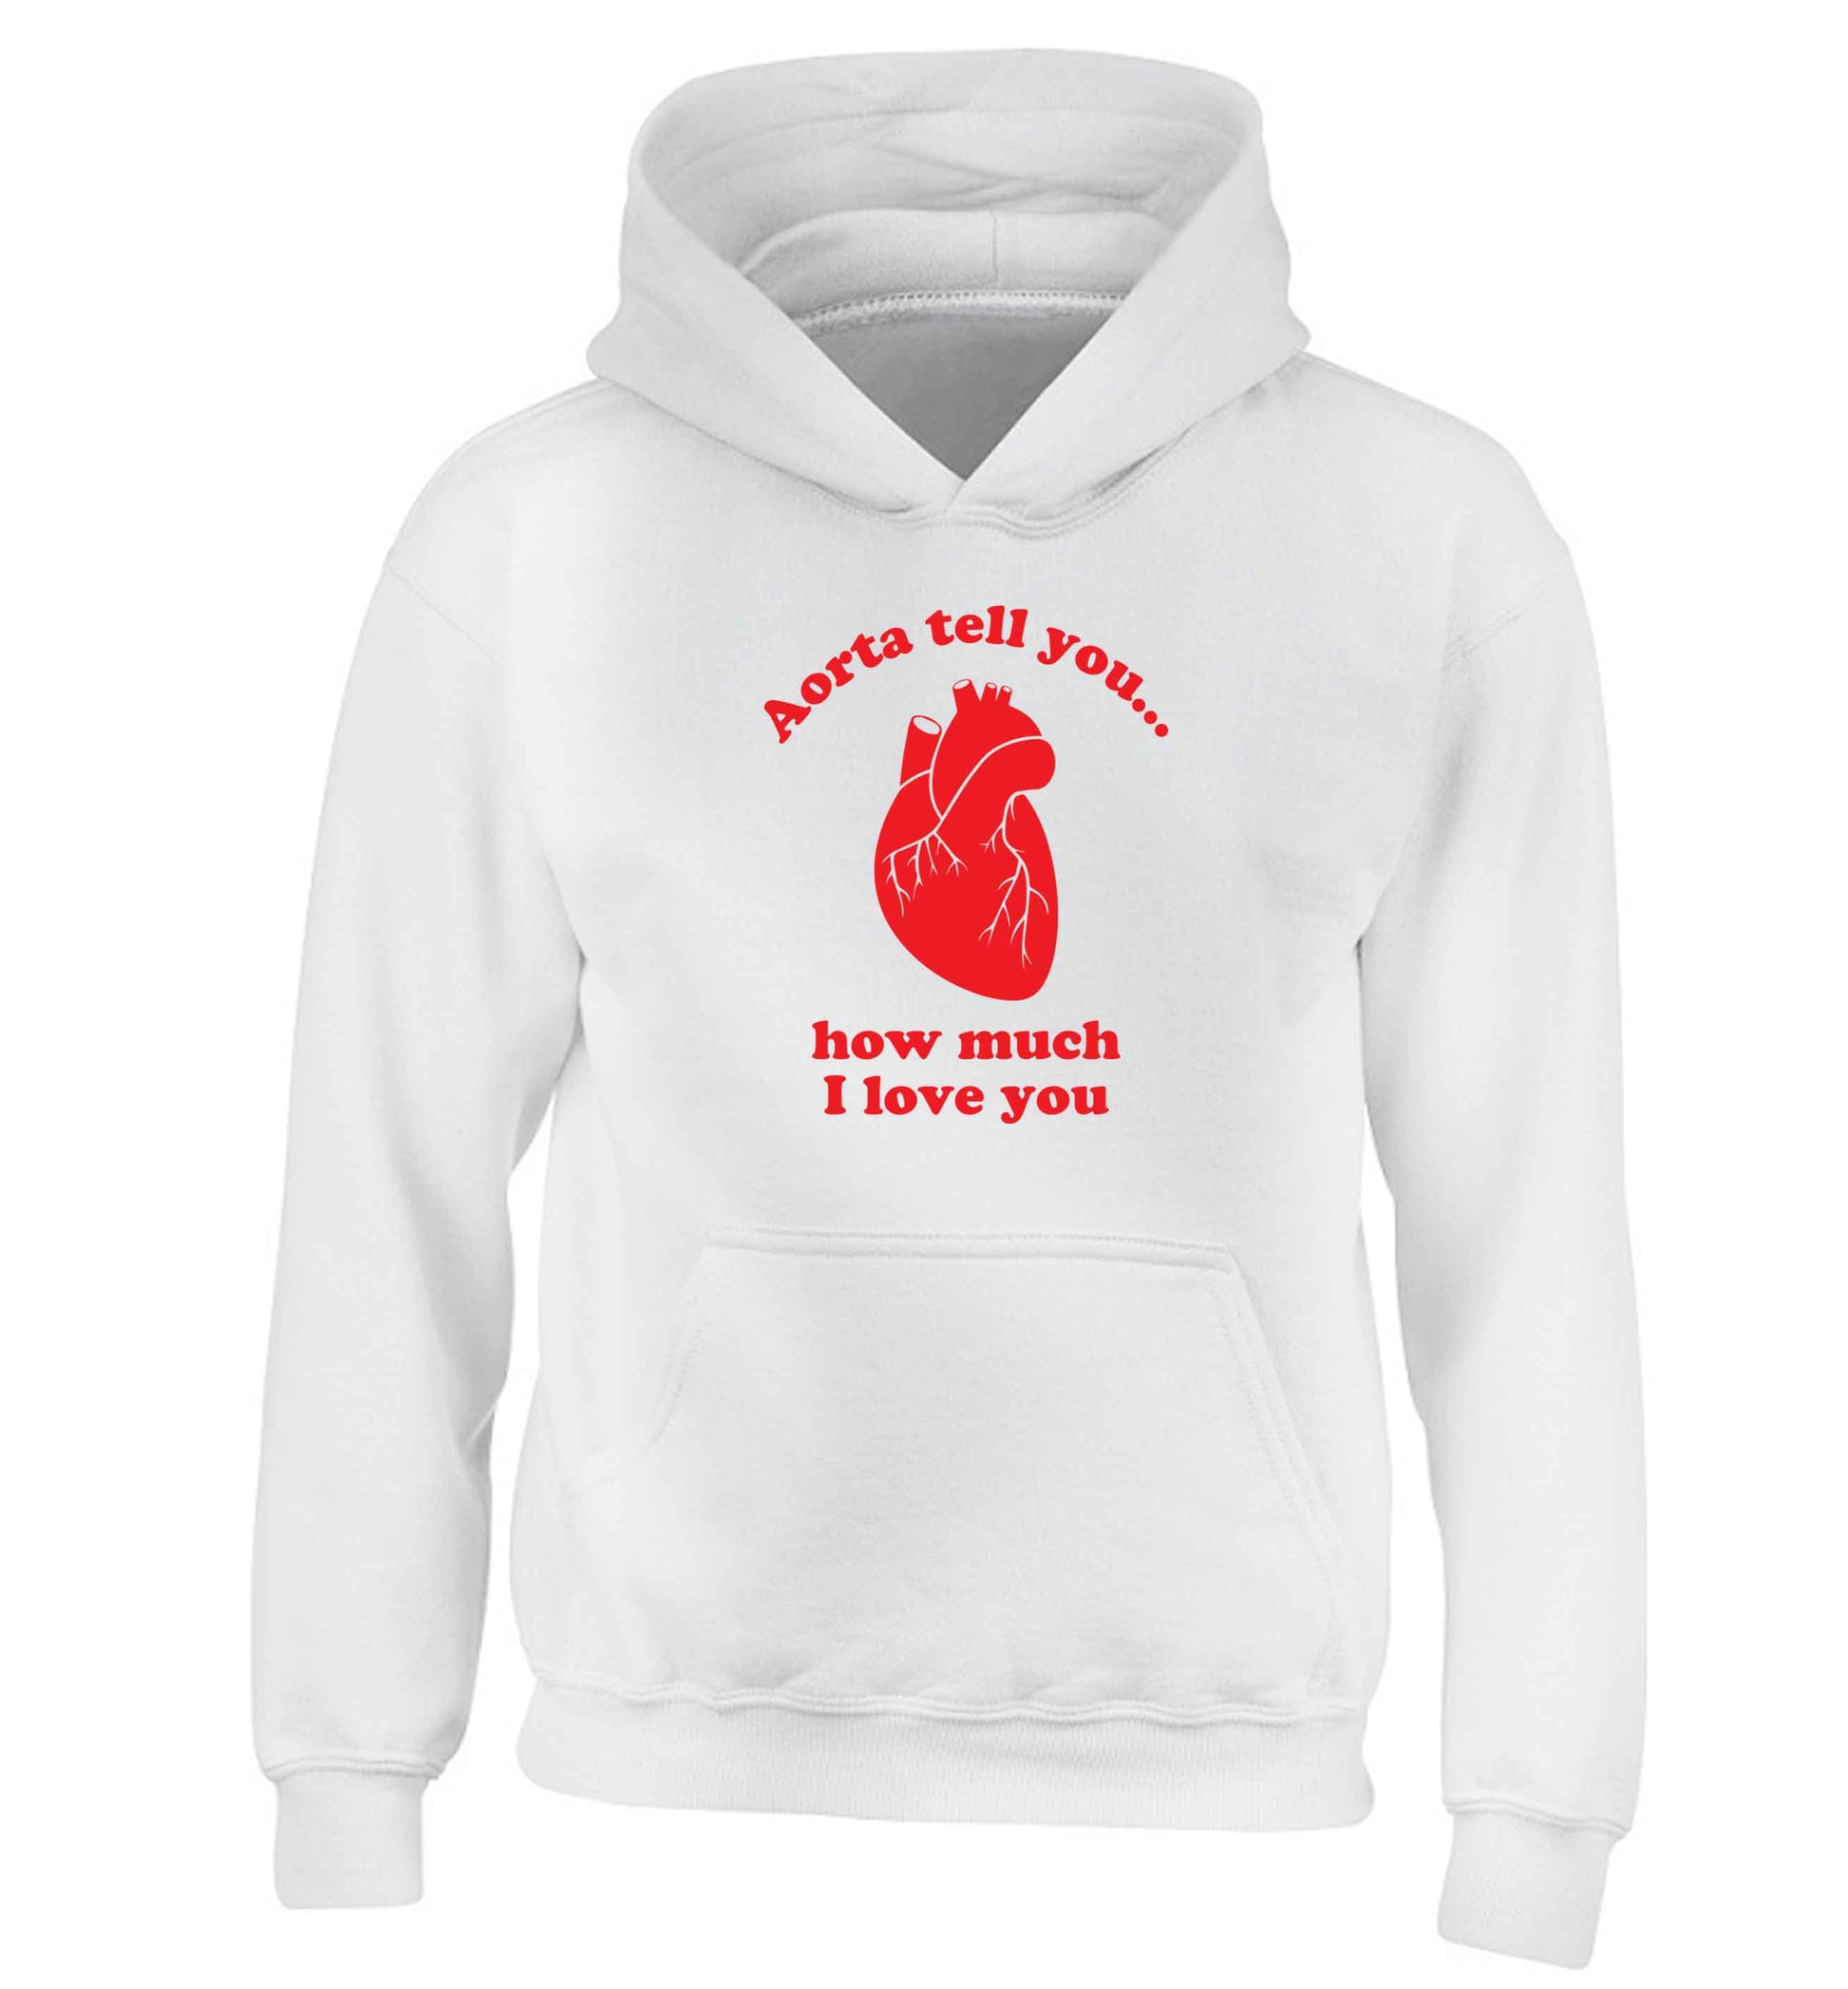 Aorta tell you how much I love you children's white hoodie 12-13 Years